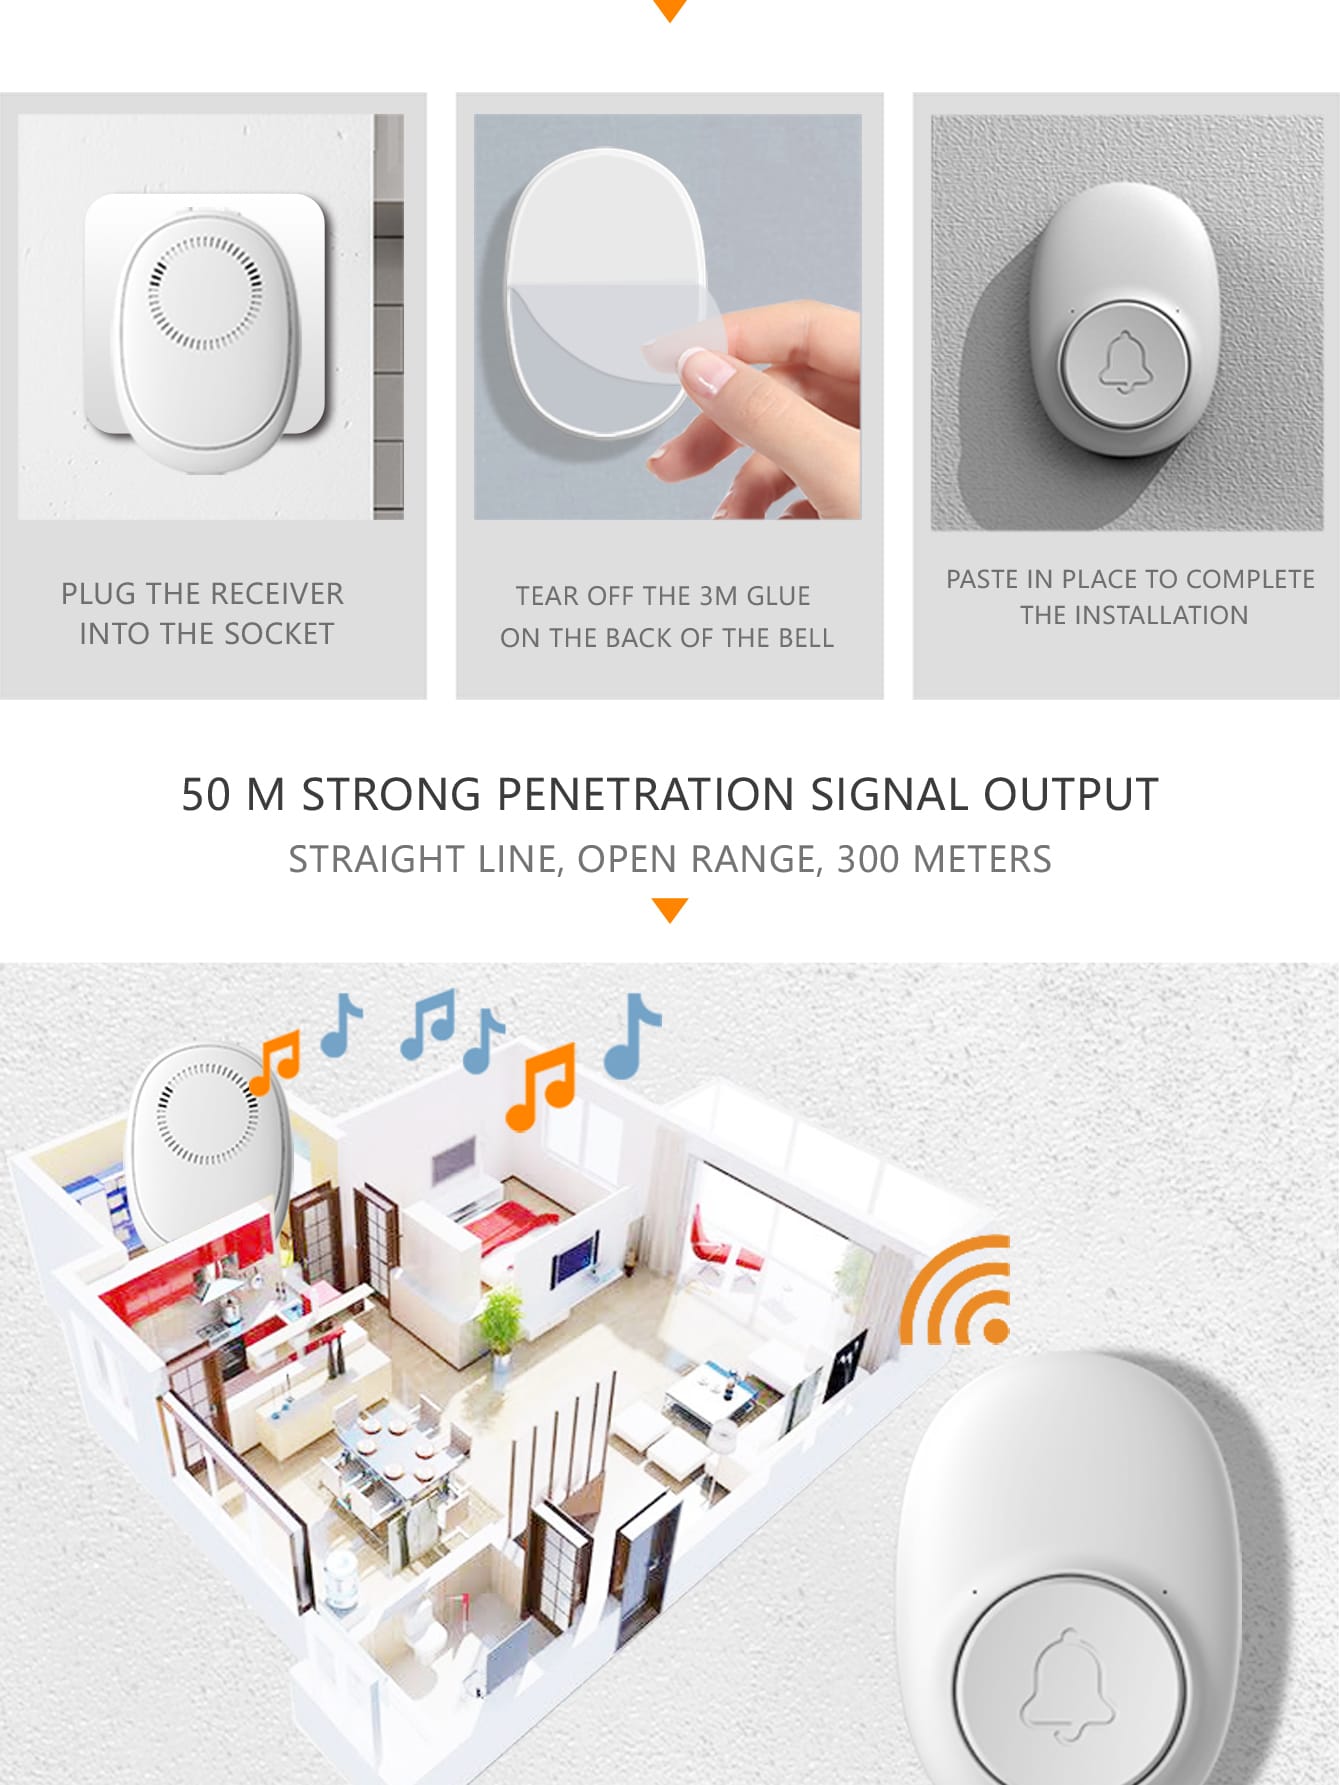 Wireless Intelligent Doorbell With Remote Control Button And Waterproof Electronic Receiver, Including 1 Transmitter, 1 Receiver, 1 Battery, 1 User Manual, Double-sided Tape And 2 Screws, Suitable For Uk/us/eu Standards, Ideal For Elderly. Sleek--5